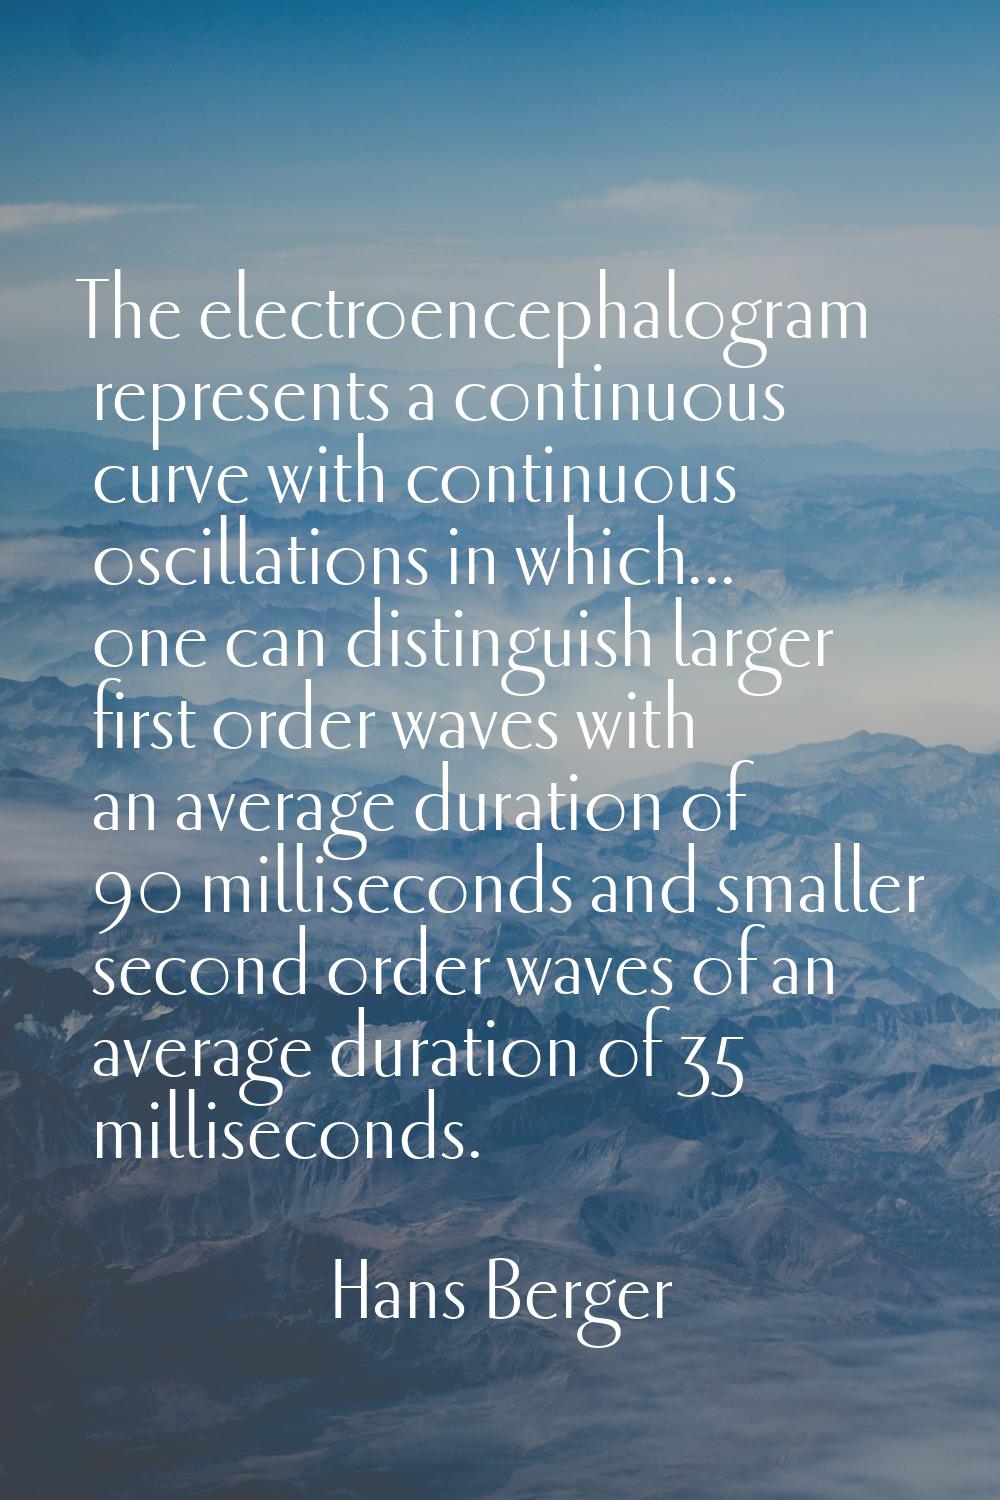 The electroencephalogram represents a continuous curve with continuous oscillations in which... one